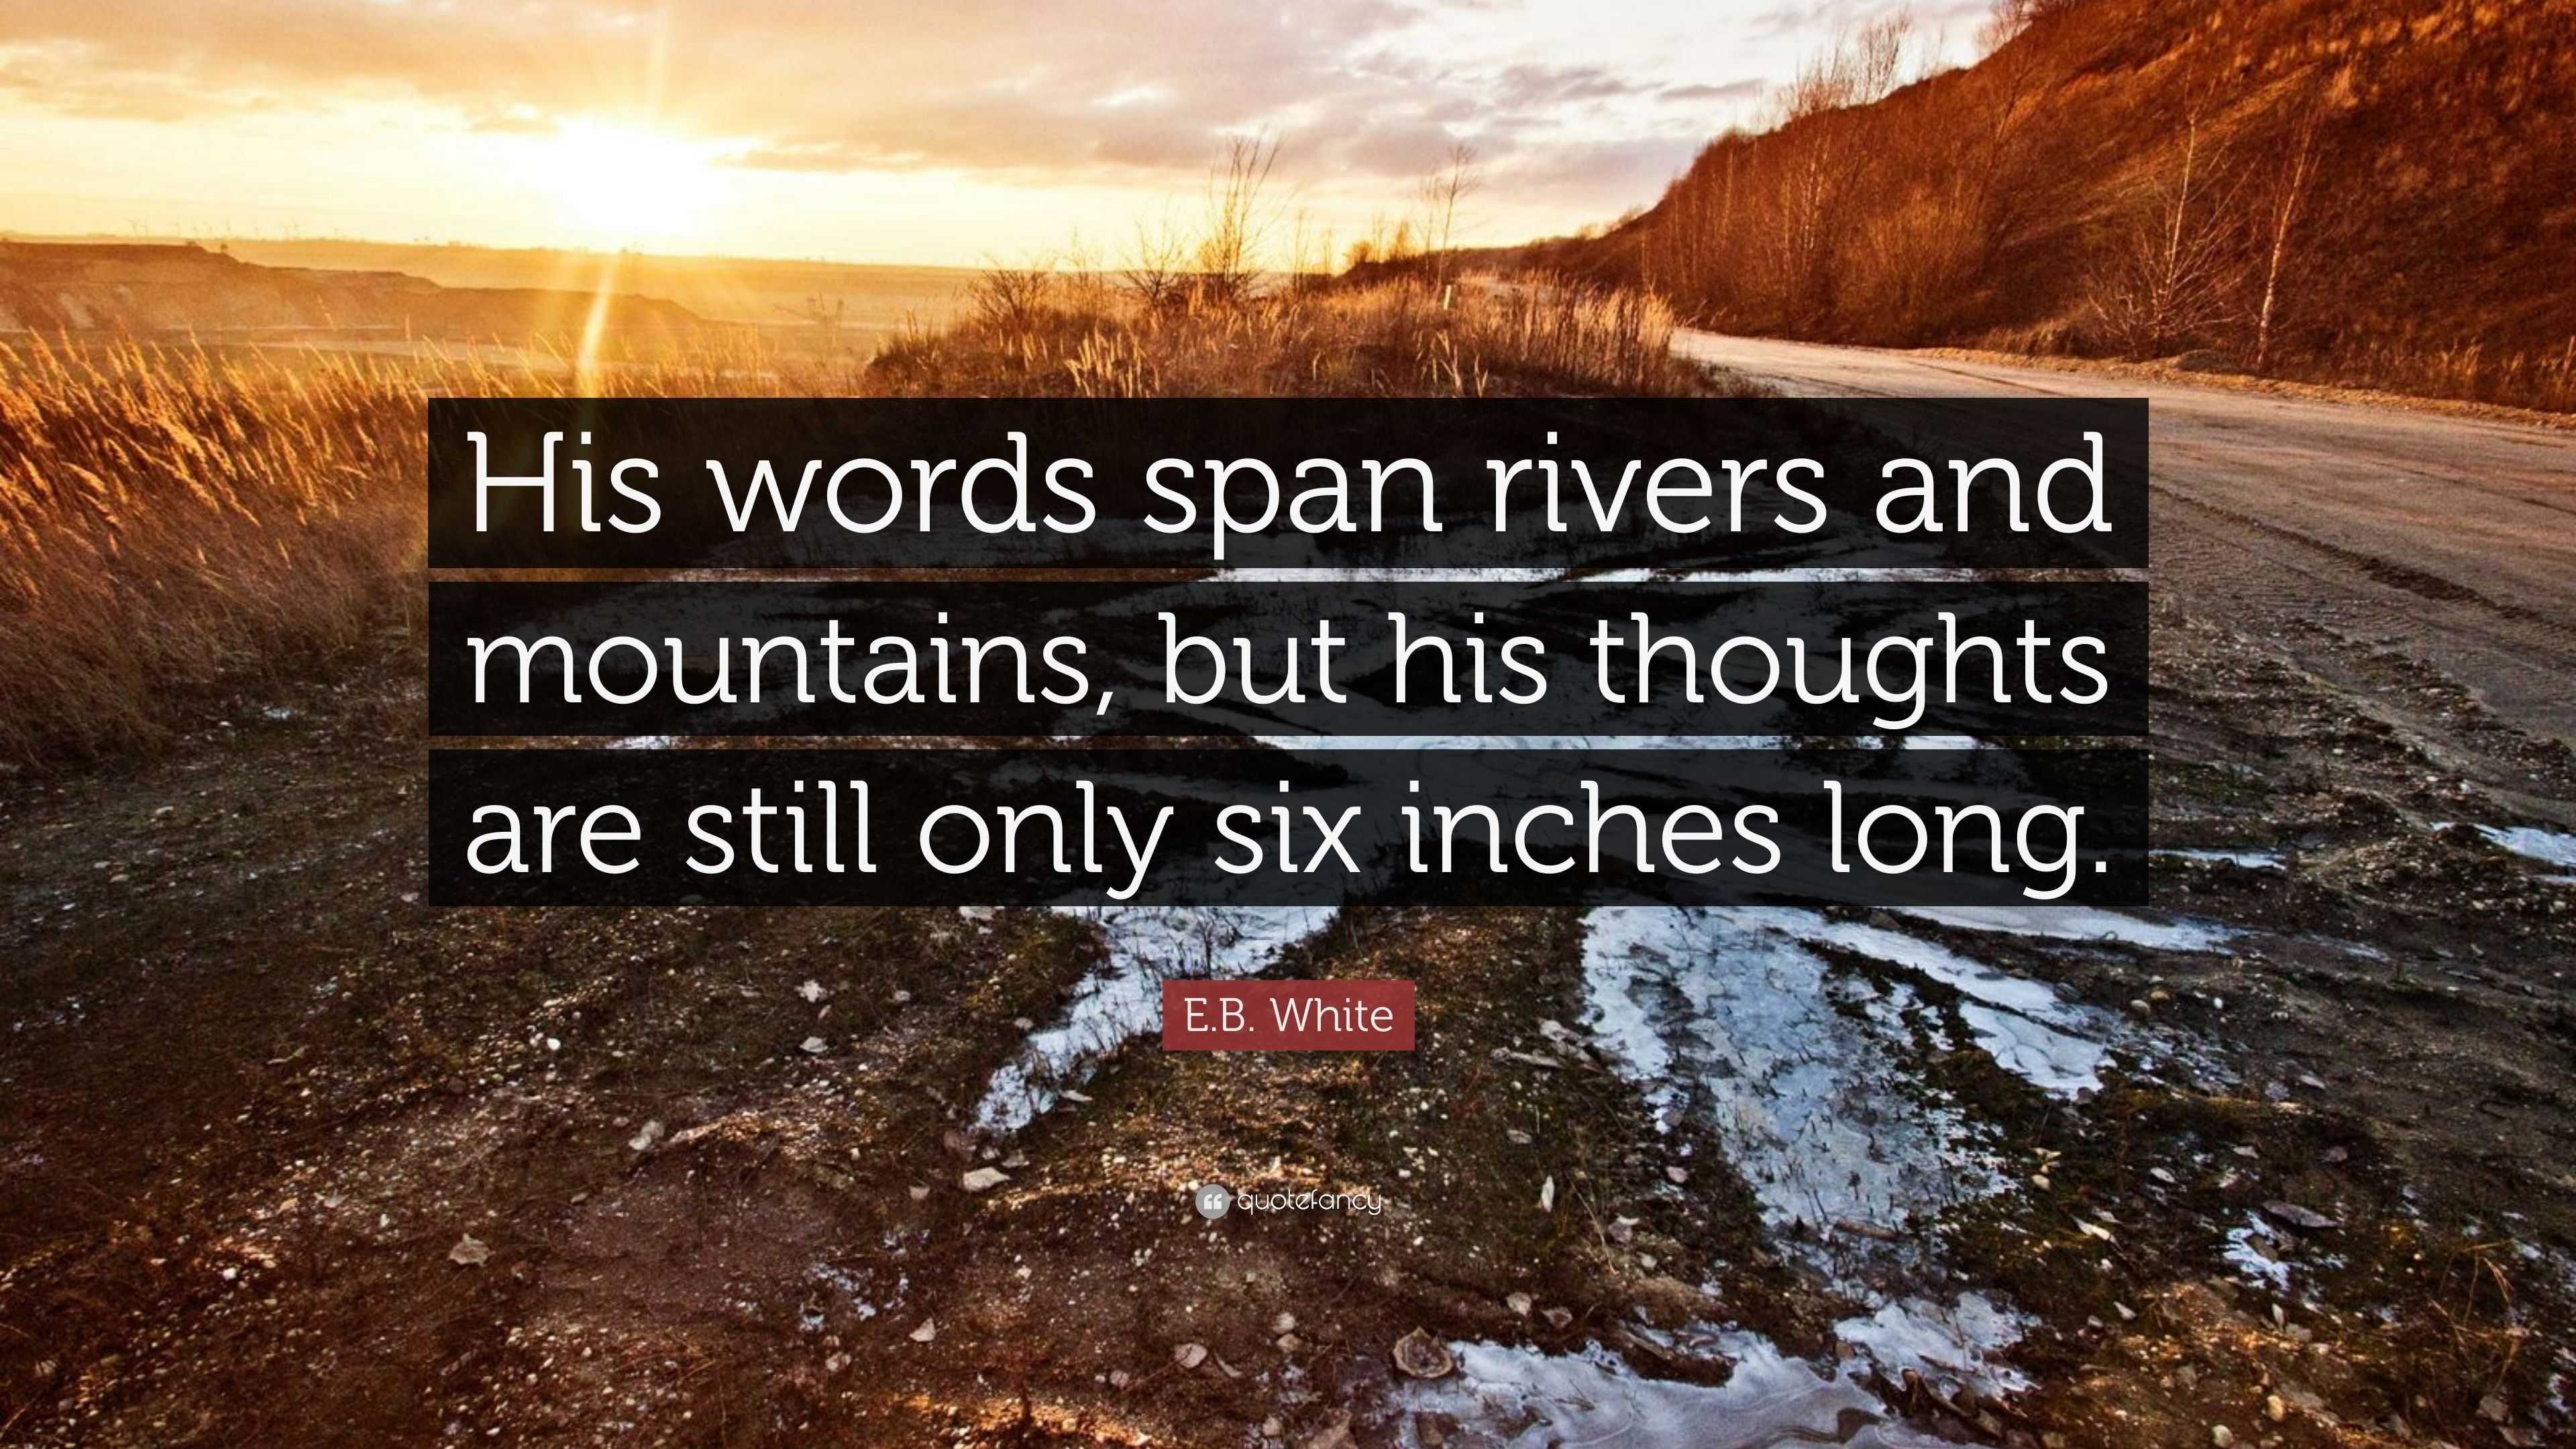 E.B. White Quote “His words span rivers and mountains